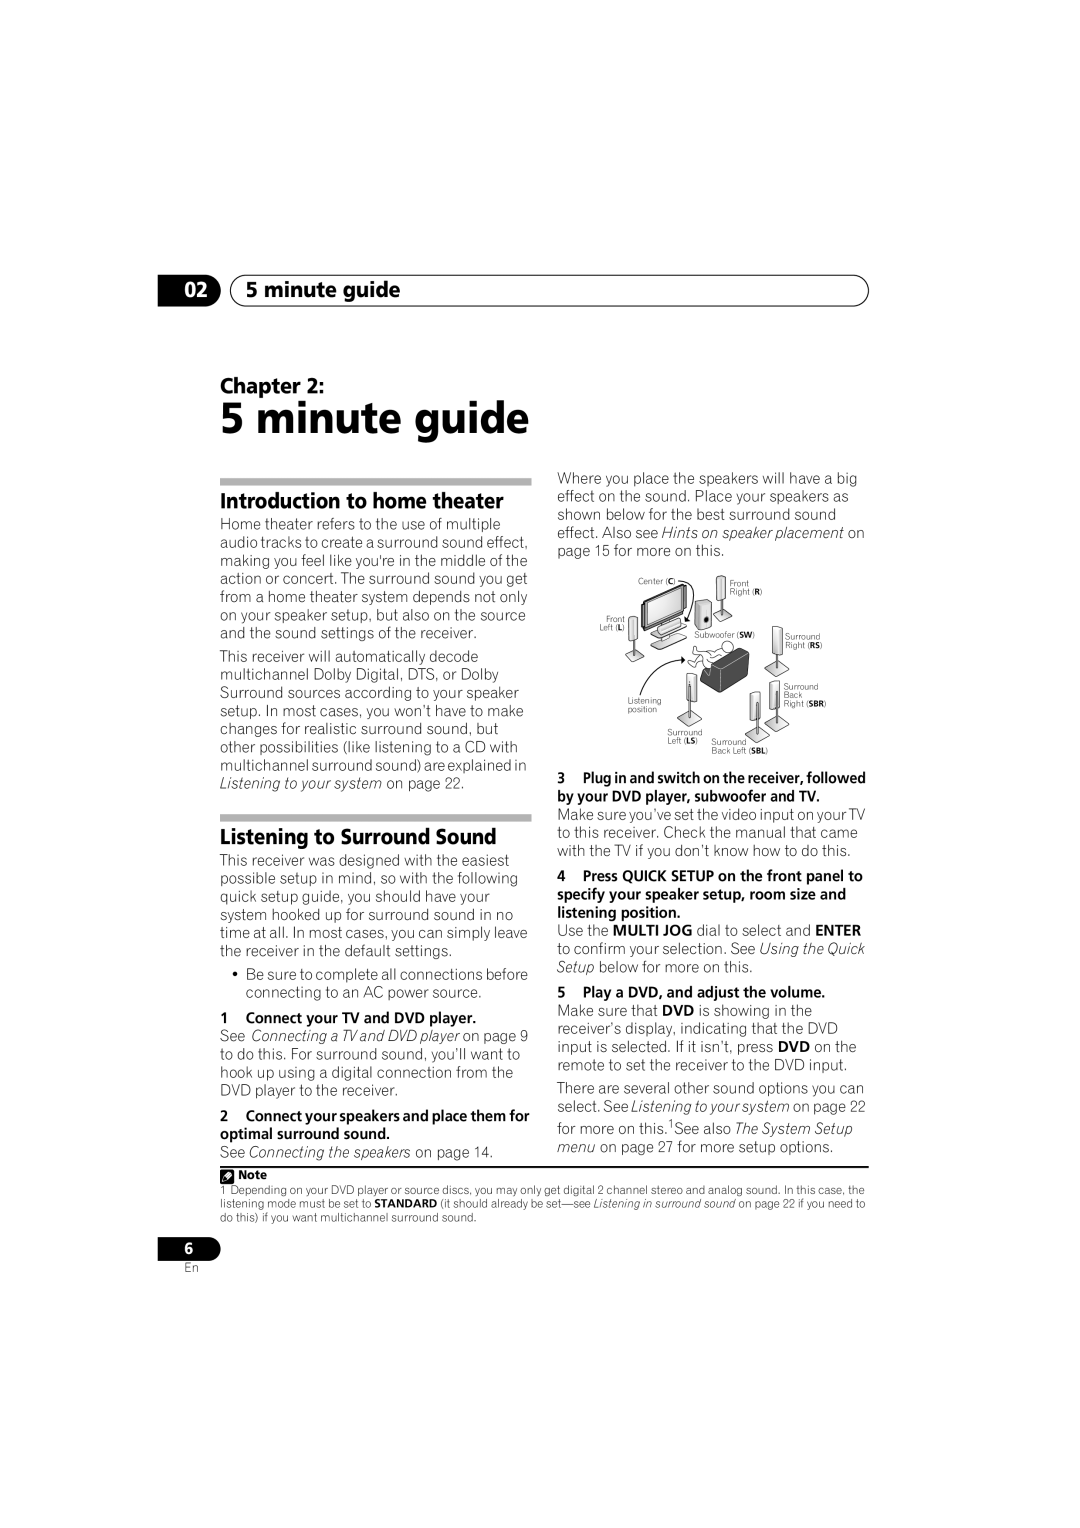 Pioneer VSX-516 operating instructions minute guide Chapter, Introduction to home theater, Listening to Surround Sound 